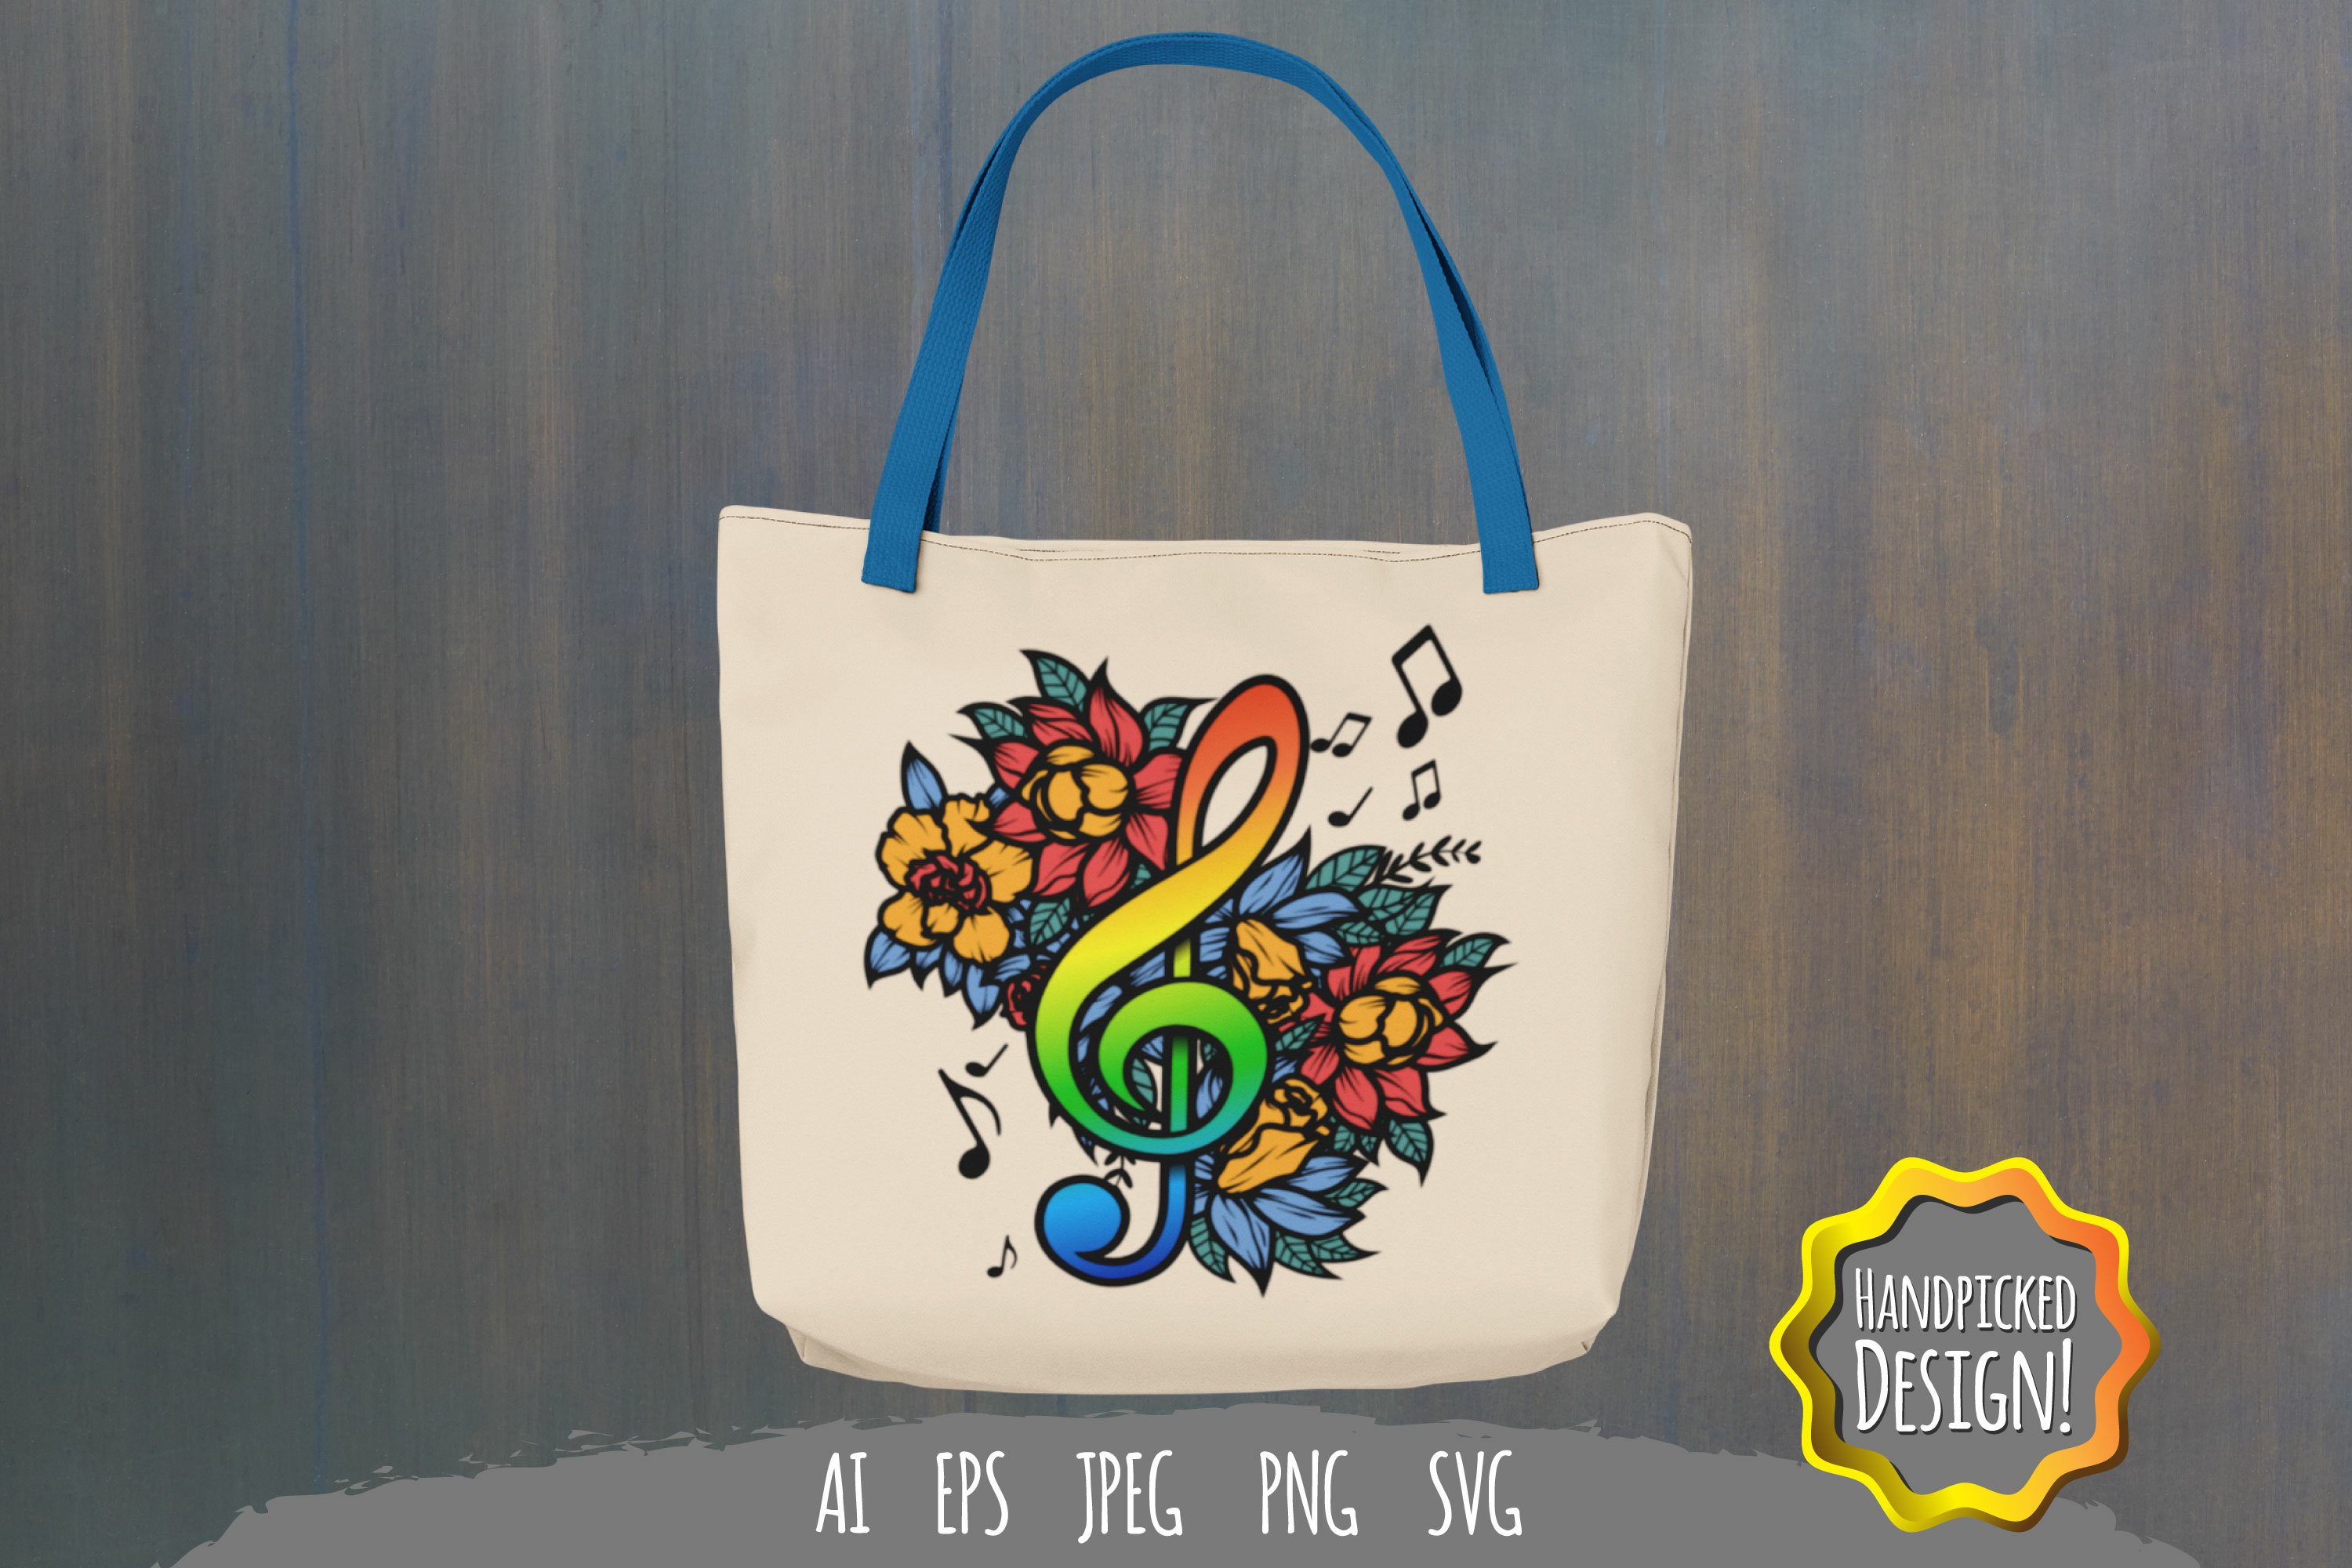 Eco bag with music note illustration.